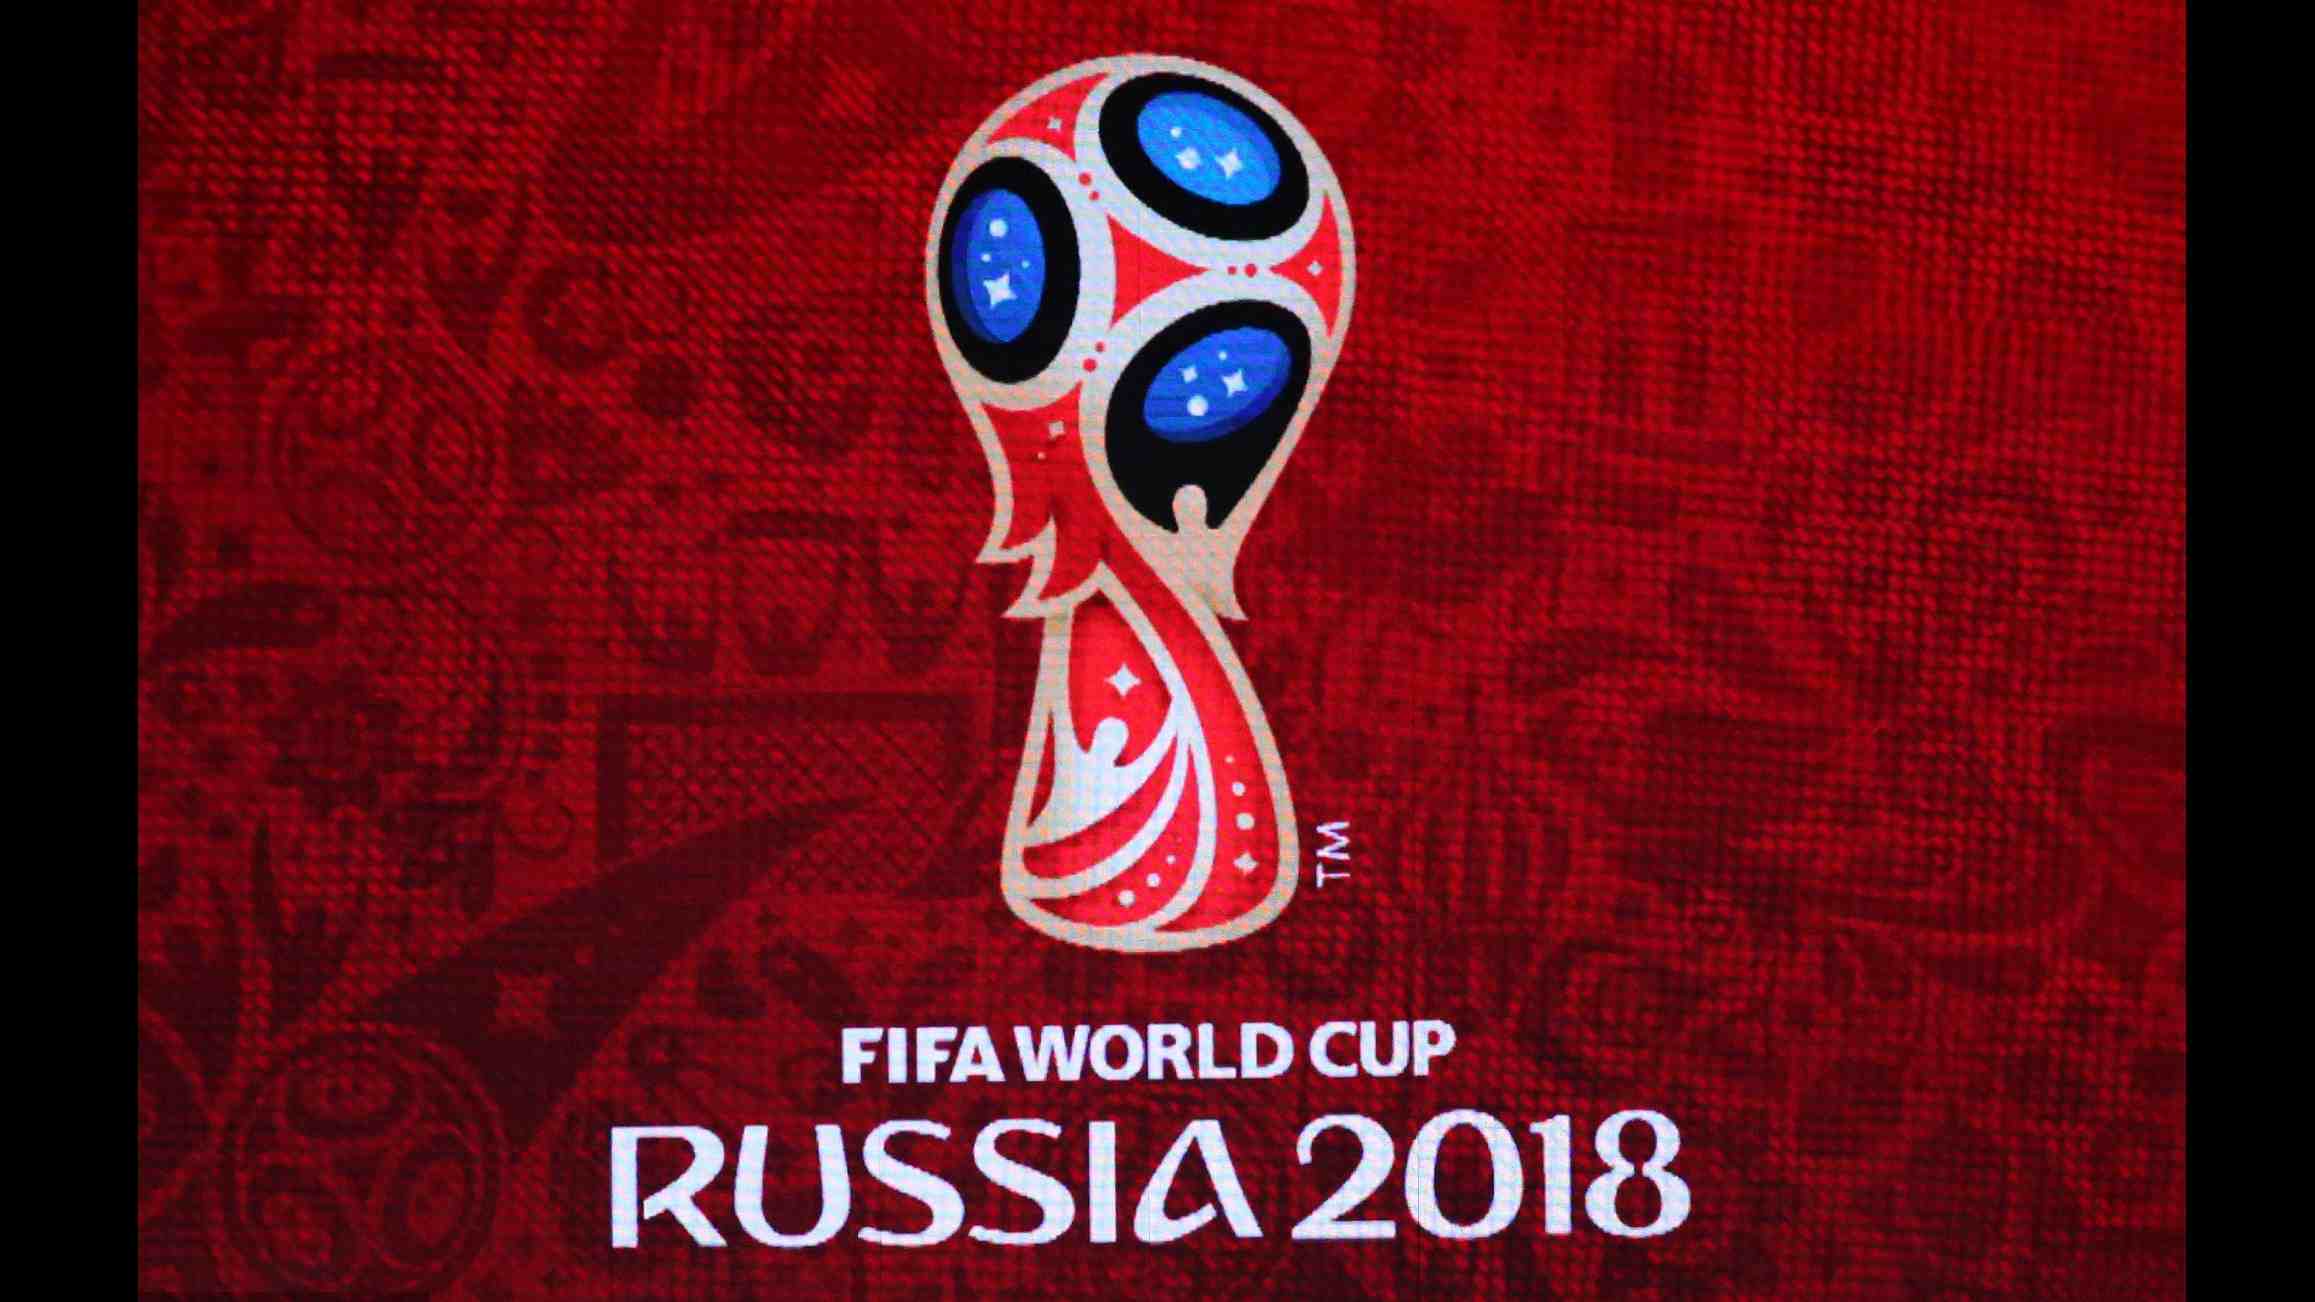 2018 FIFA World Cup official song to be released